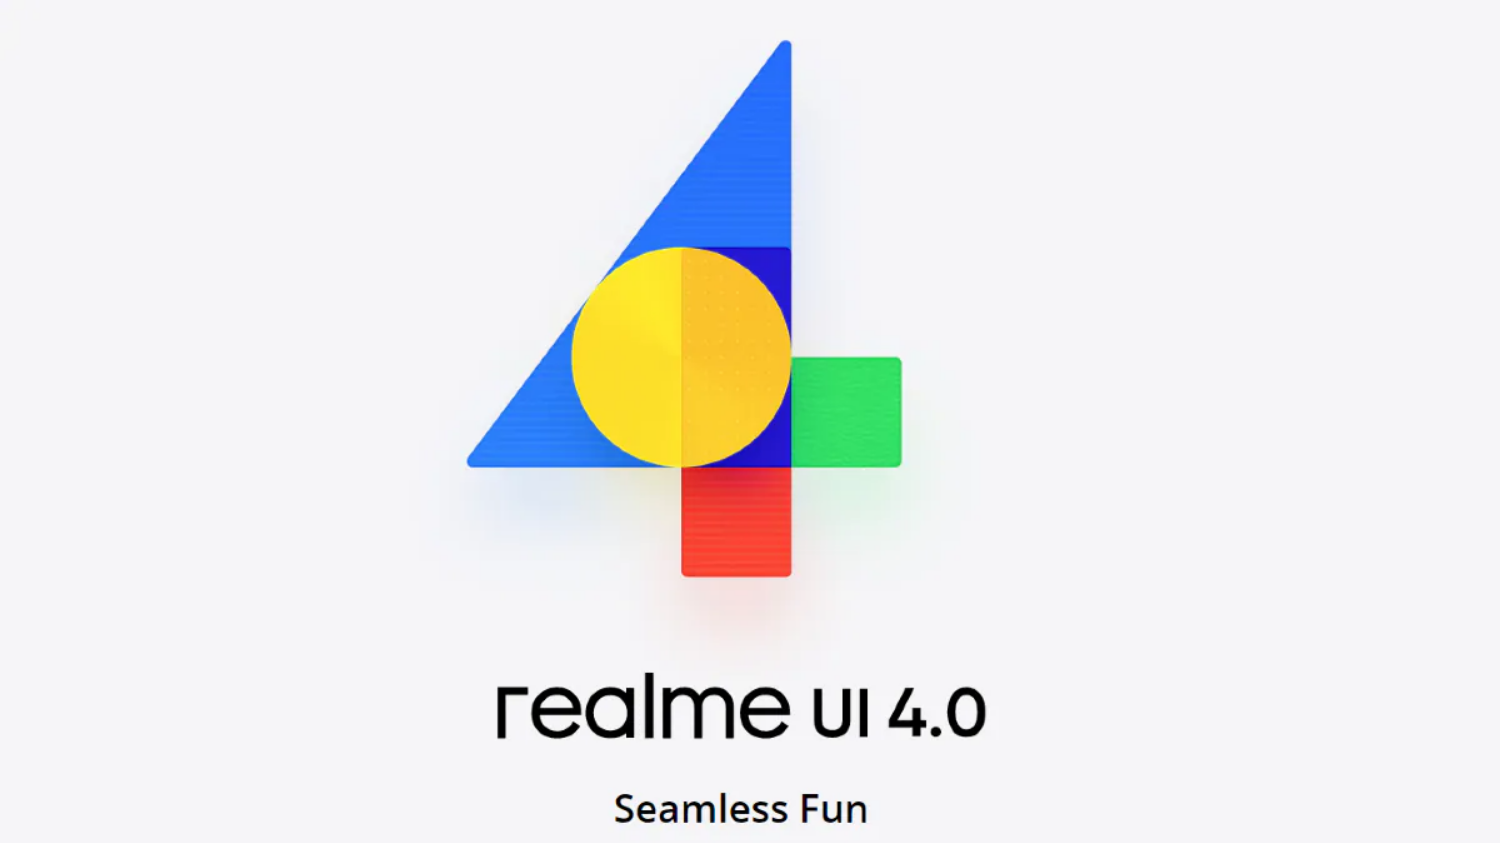 Realme UI 4.0 Announced With New Always-on Display, Omoji Virtual Avatars, More: All Details